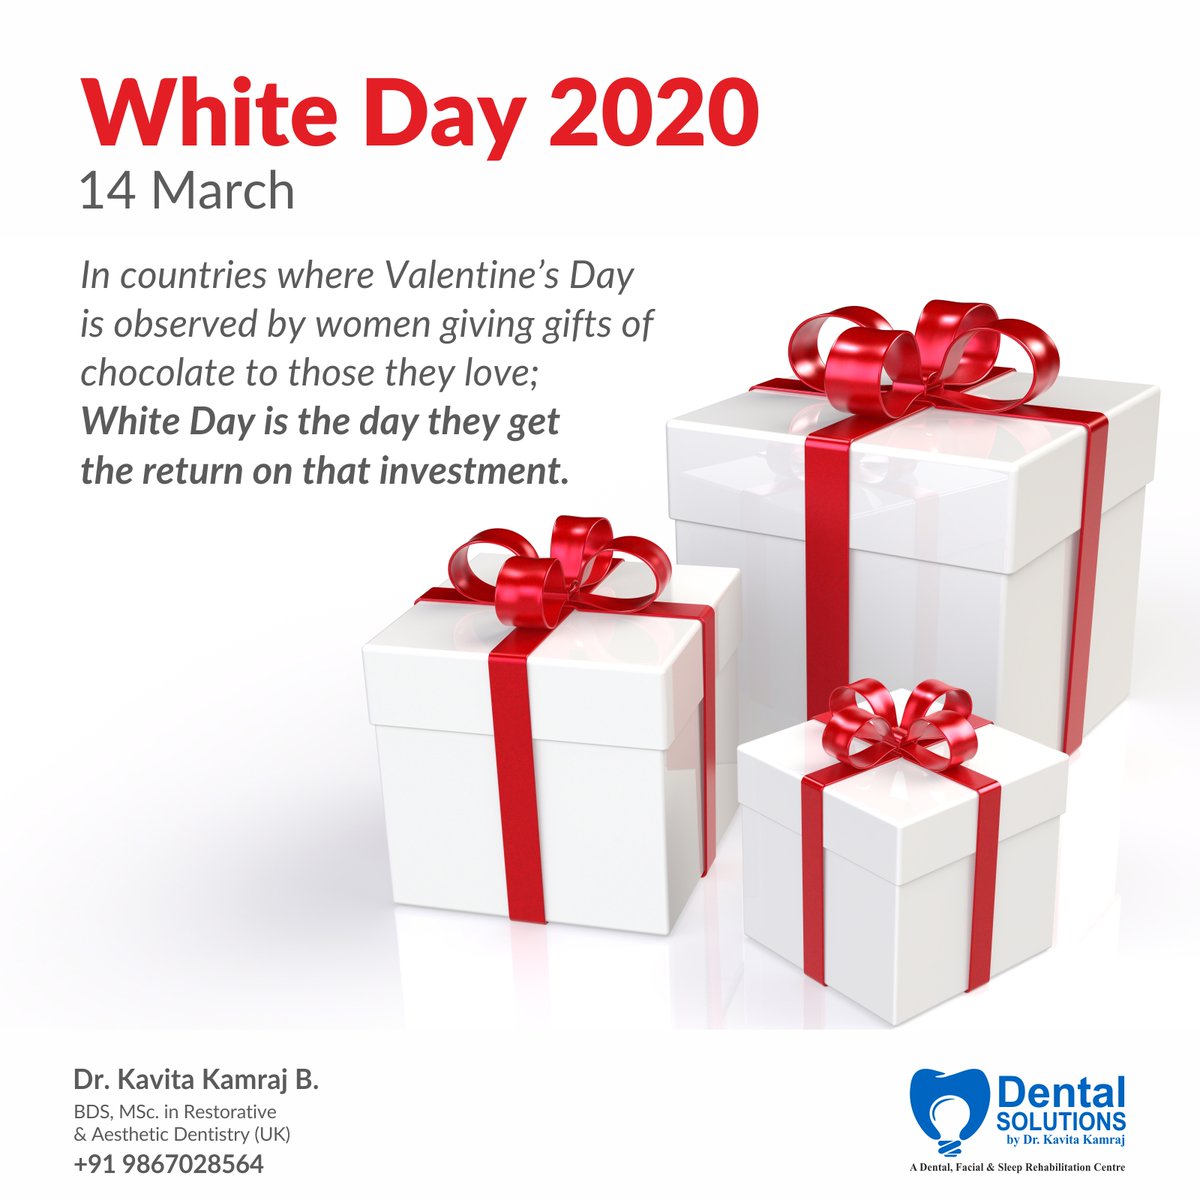 Throughout the world, Valentine’s Day is practised in largely similar ways, with the giving of gifts of chocolate to those whose respect, admiration, or love we desire. 

#WhiteDay #WorldWhiteDay2020 #keepsmiling #oralhealth #dentalcare #careforyourteeth #smileeveryday